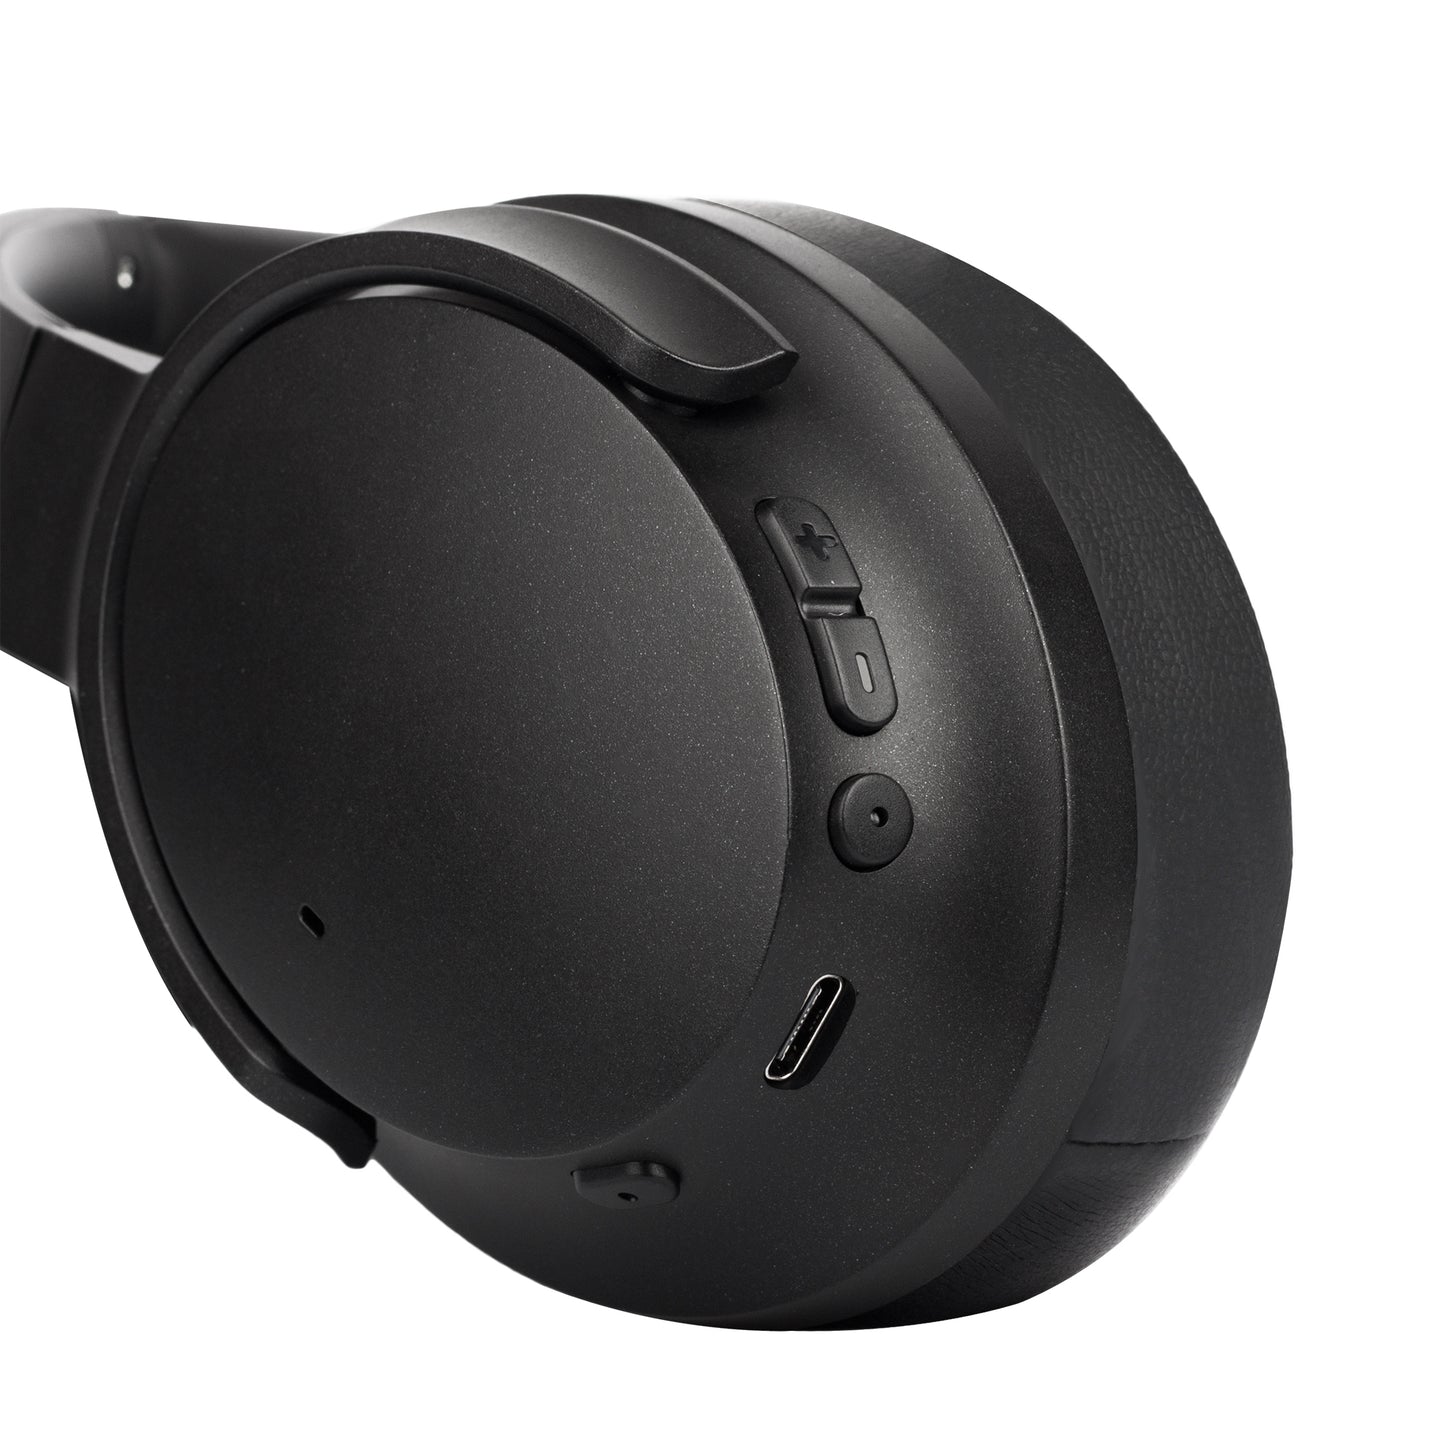 Photo of Morpheus 360 Eclipse 360 Wireless Headphone, showing Power on/off button, Volume up/down buttons, Noise cancelling button, and USB Type-C cable port on the headphones ear piece.